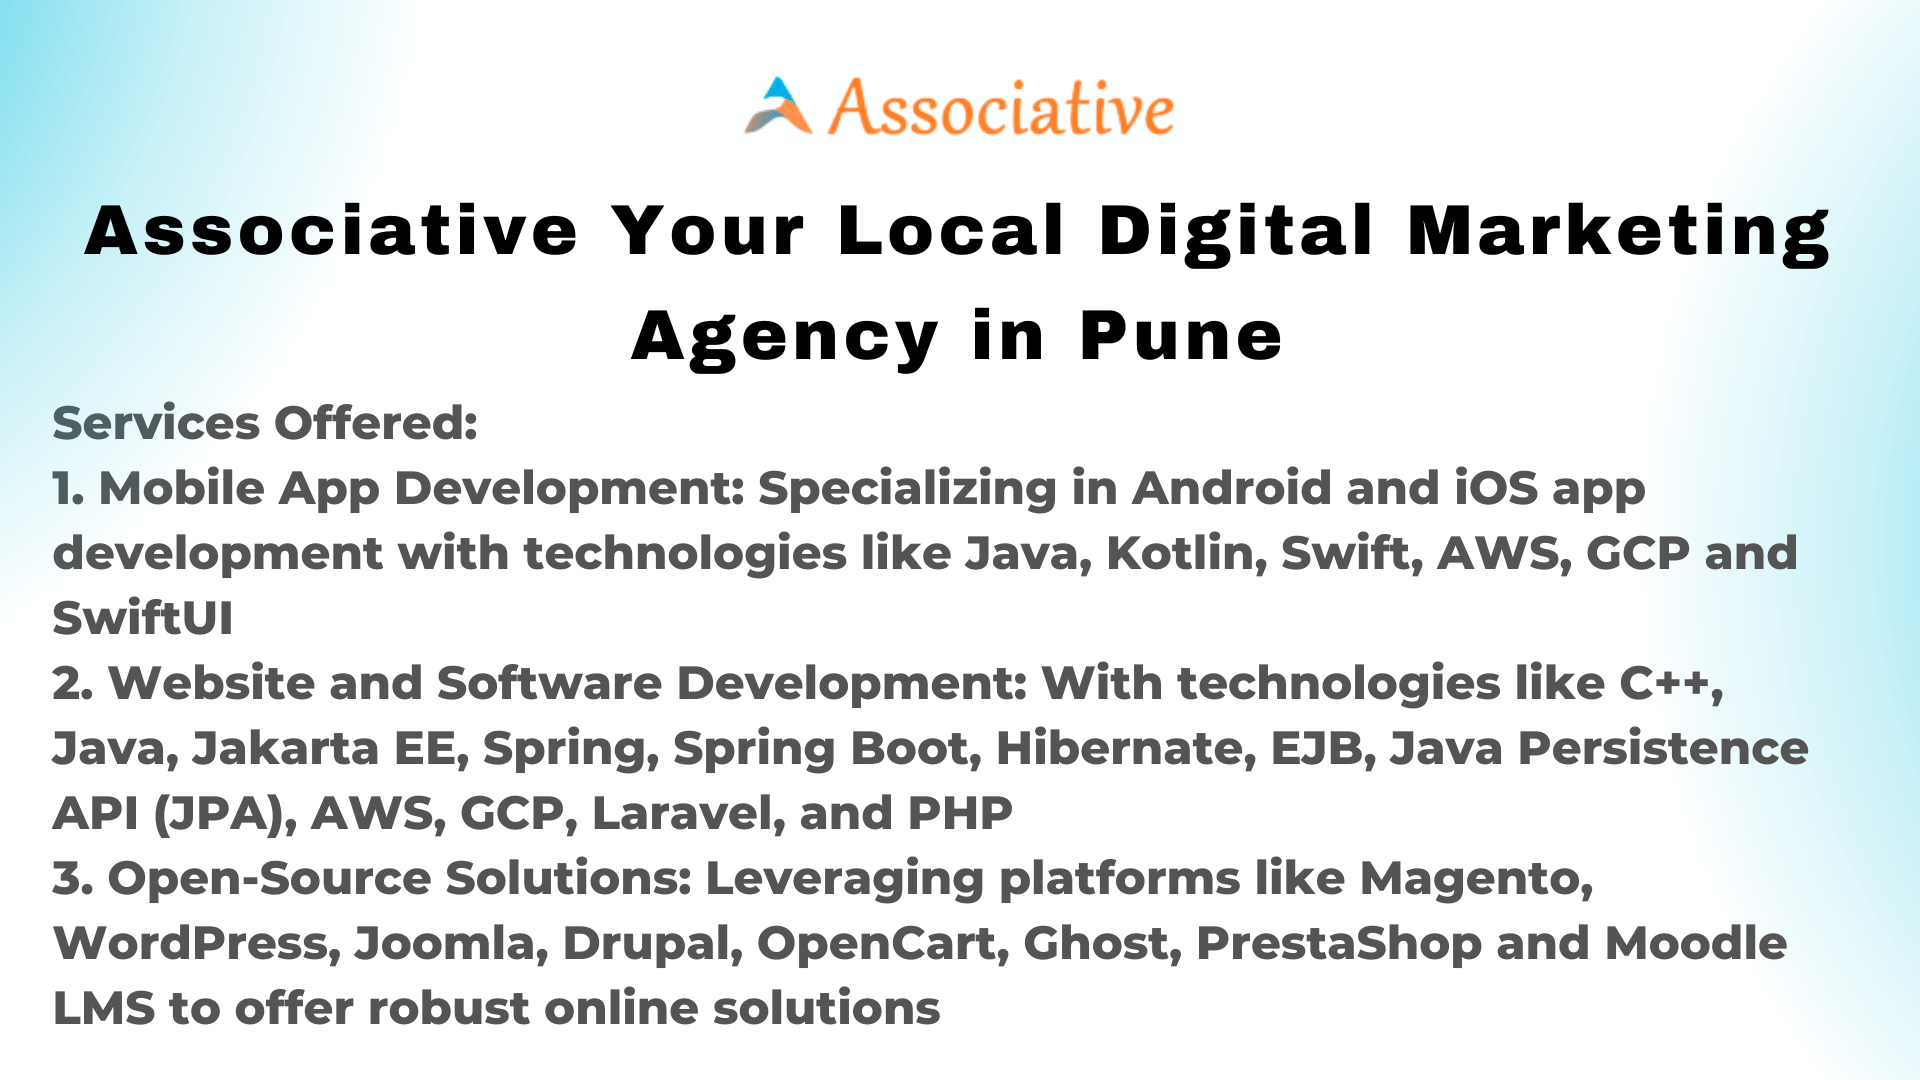 Associative Your Local Digital Marketing Agency in Pune